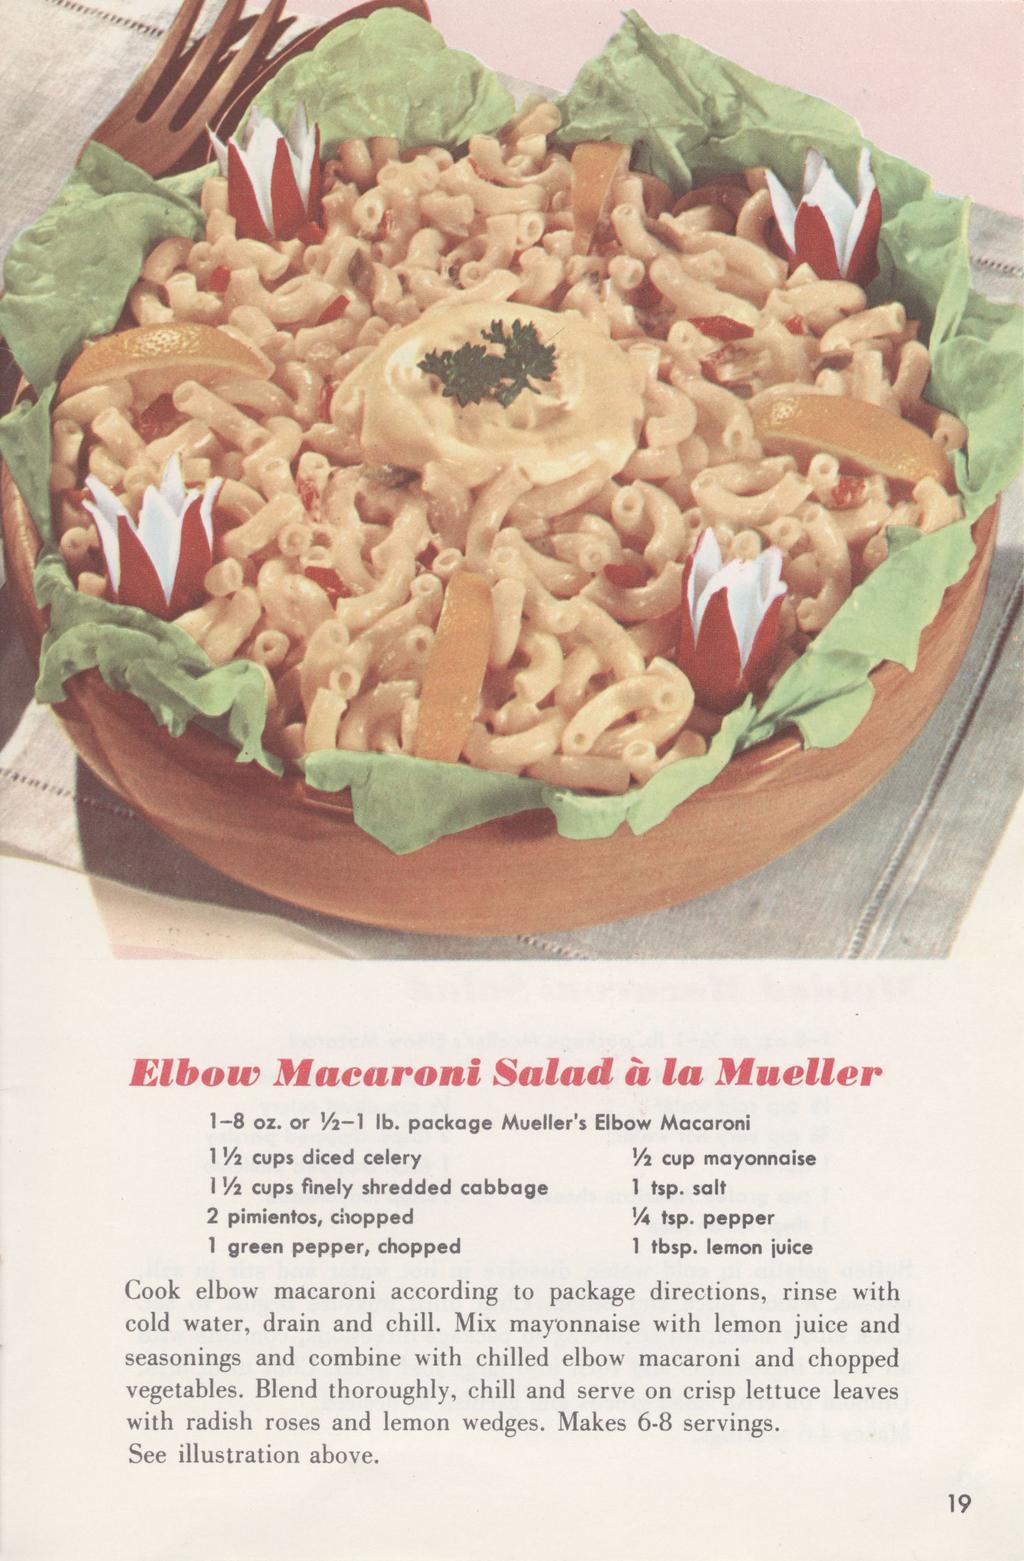 Elbow Macaroni Salad a la Mueller 1-8 oz. or '/2-1 lb. package Mueller's Elbow Macaroni 1 Vi cups diced celery Vi cup mayonnaise 1 Vi cups finely shredded cabbage 1 tsp.